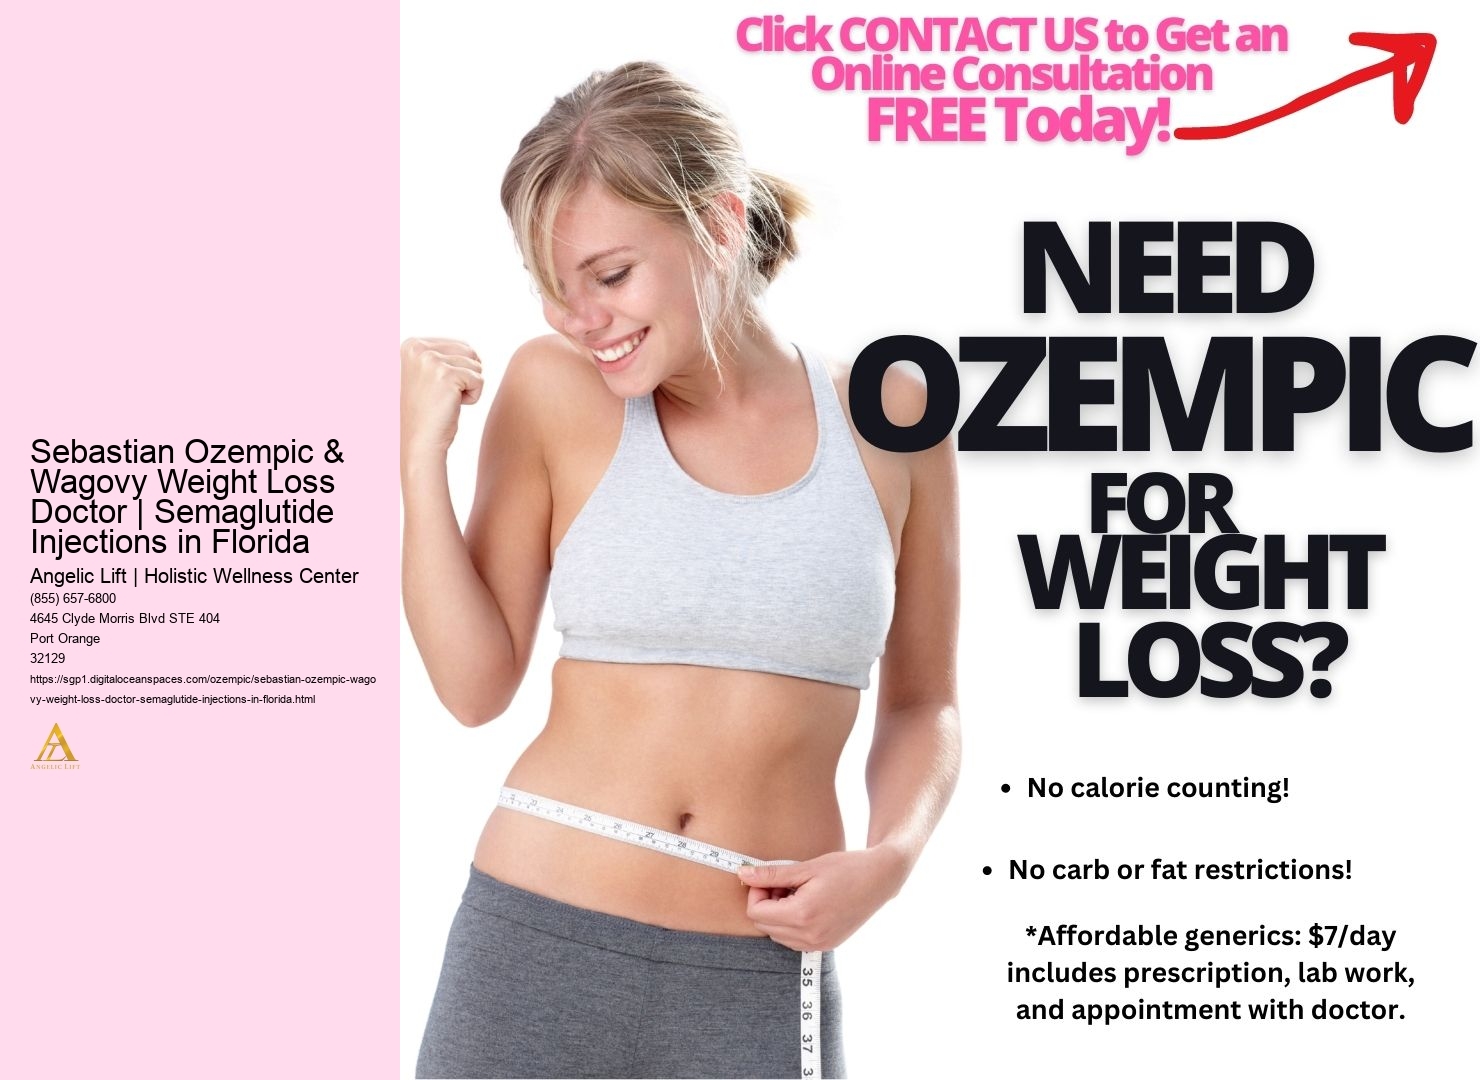 Sebastian Ozempic & Wagovy Weight Loss Doctor | Semaglutide Injections in Florida